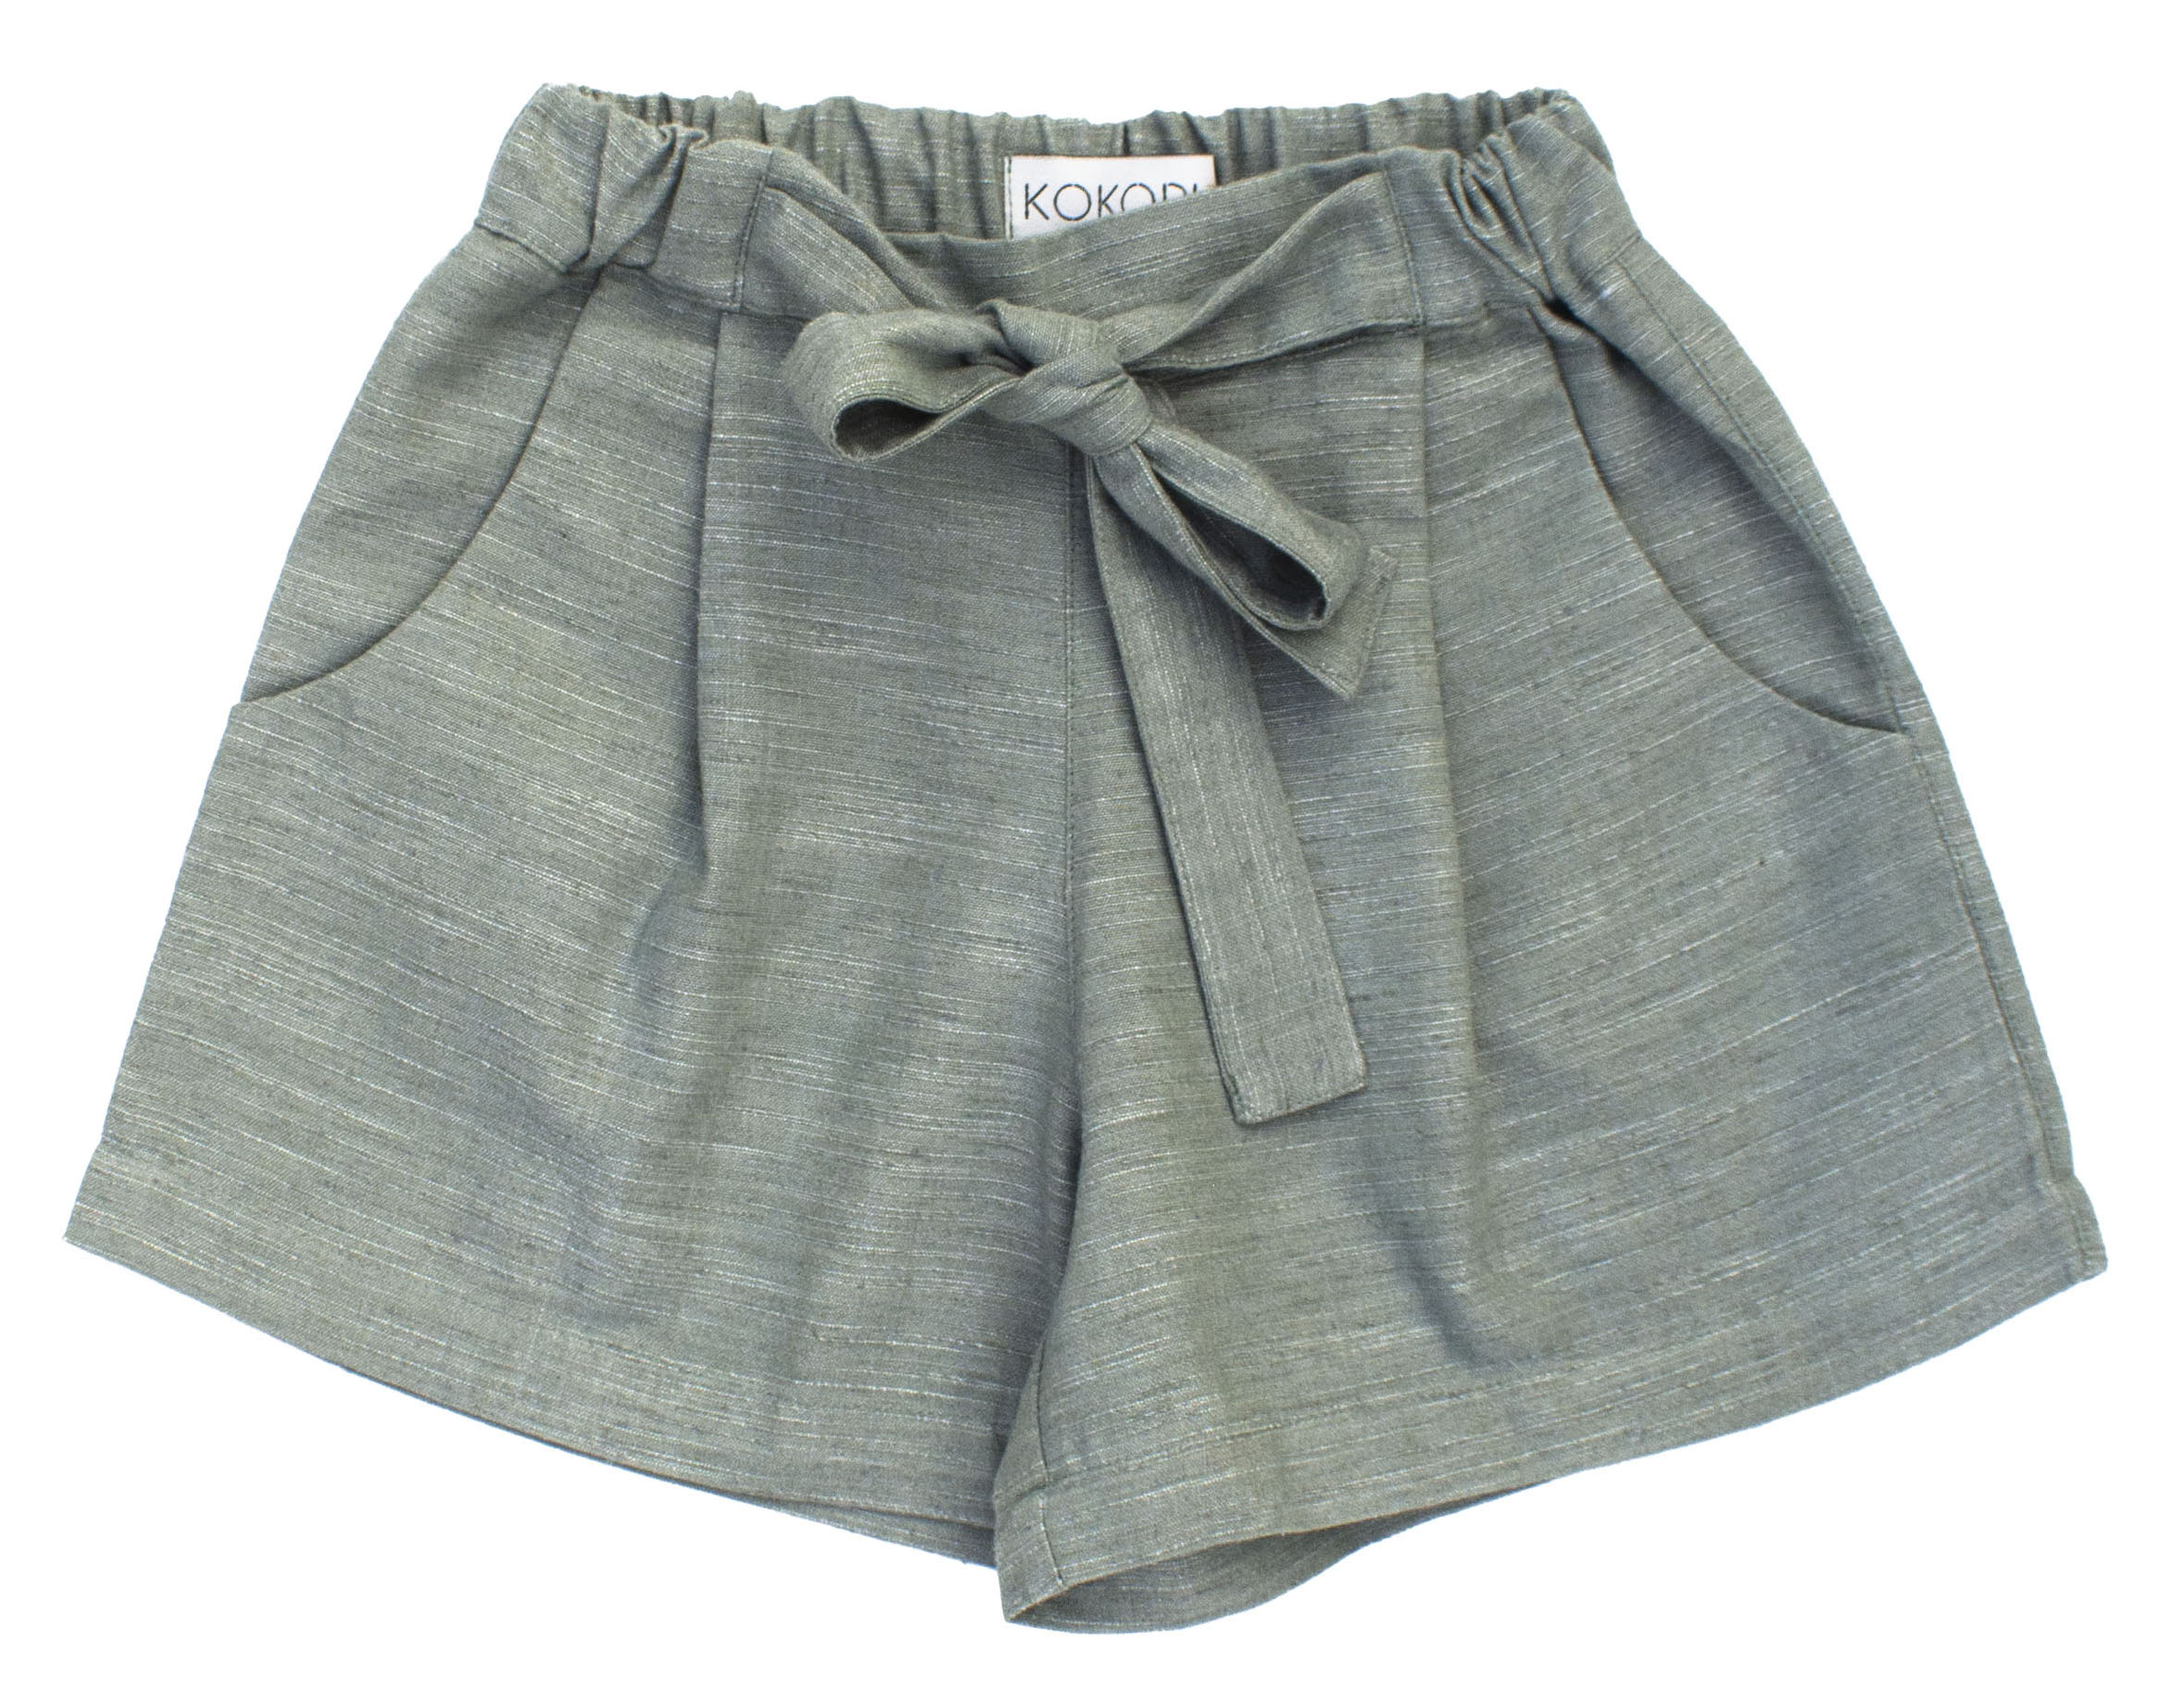                                                                                                                                                                                 Indie Olive Green Shorts 